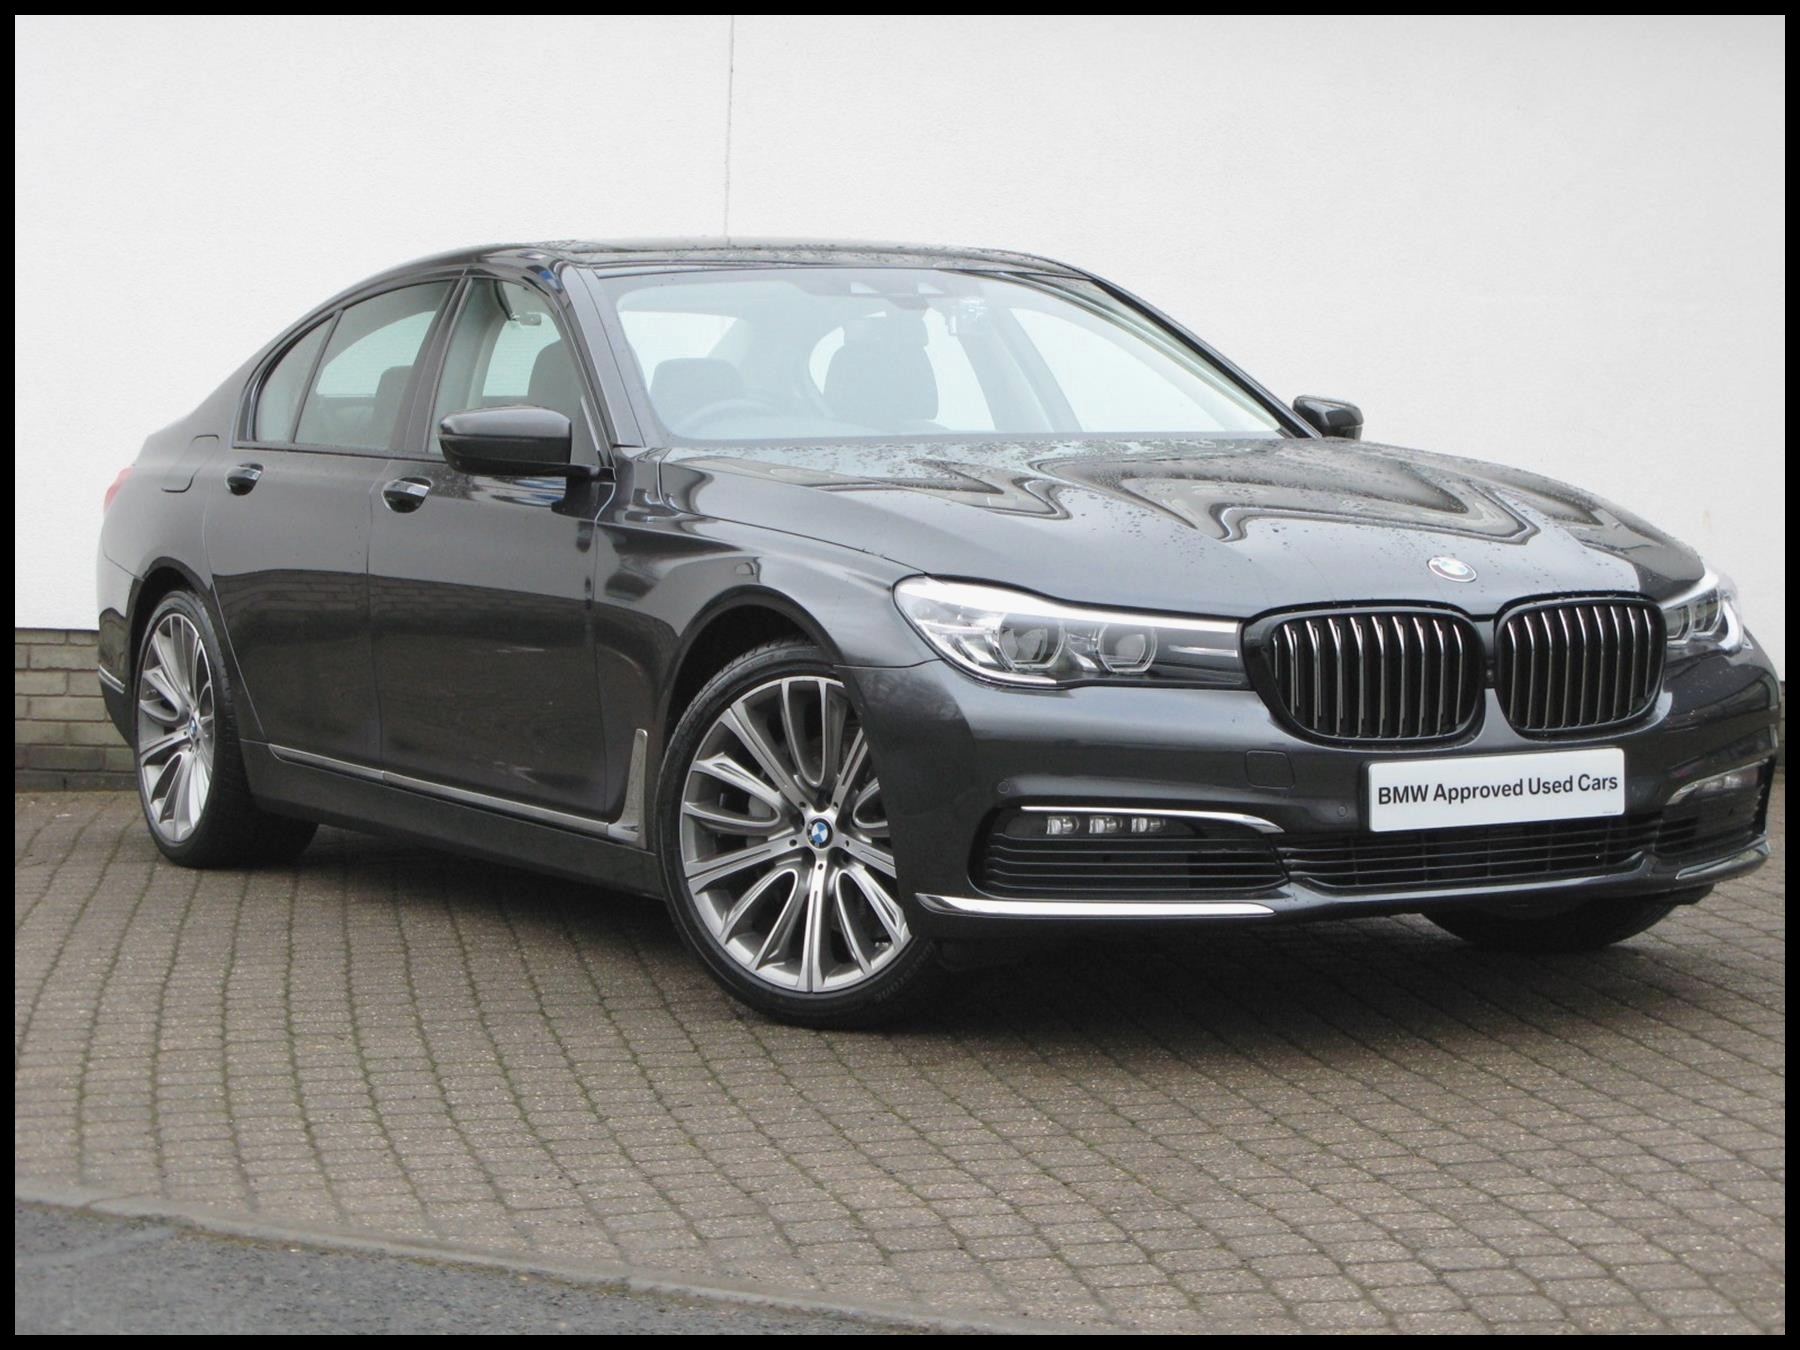 Used 2009 Bmw 750 for Sale Beautiful Latest Used 2017 Bmw 7 Series G11 740d Xdrive